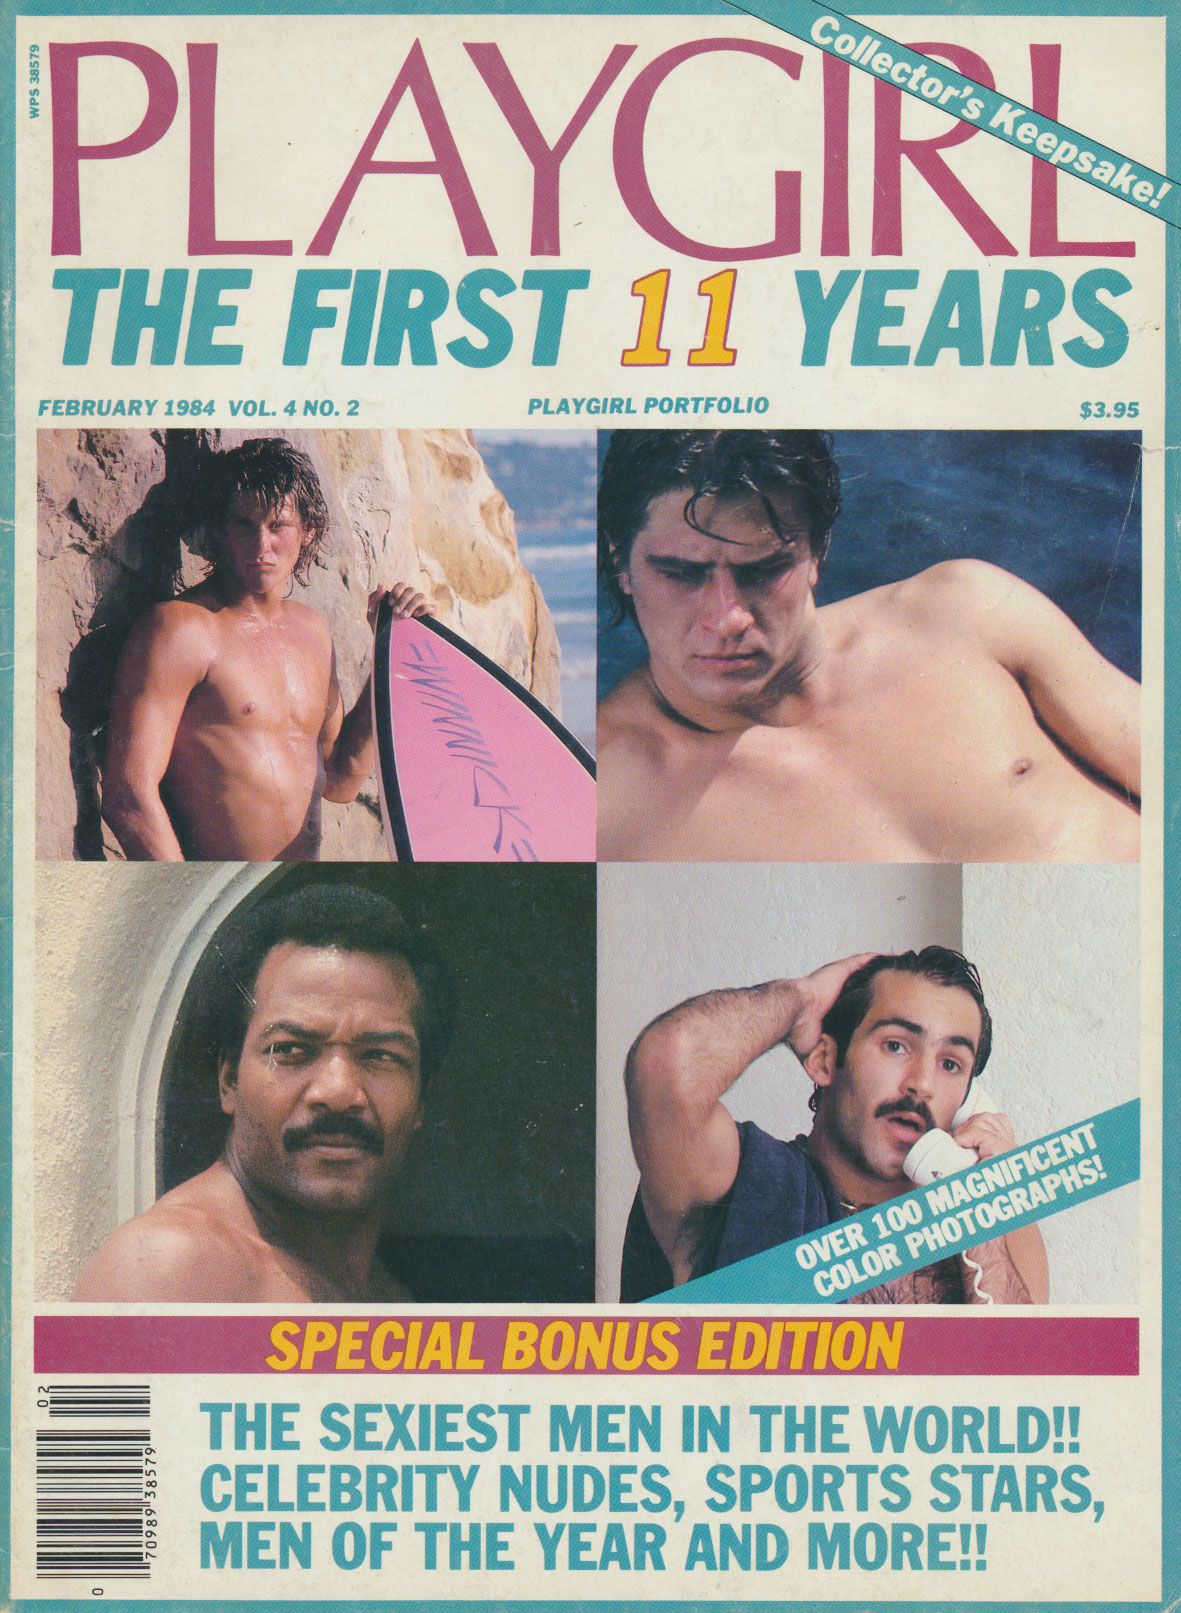 Playgirl Portfolio February 1984, The First 11 Years